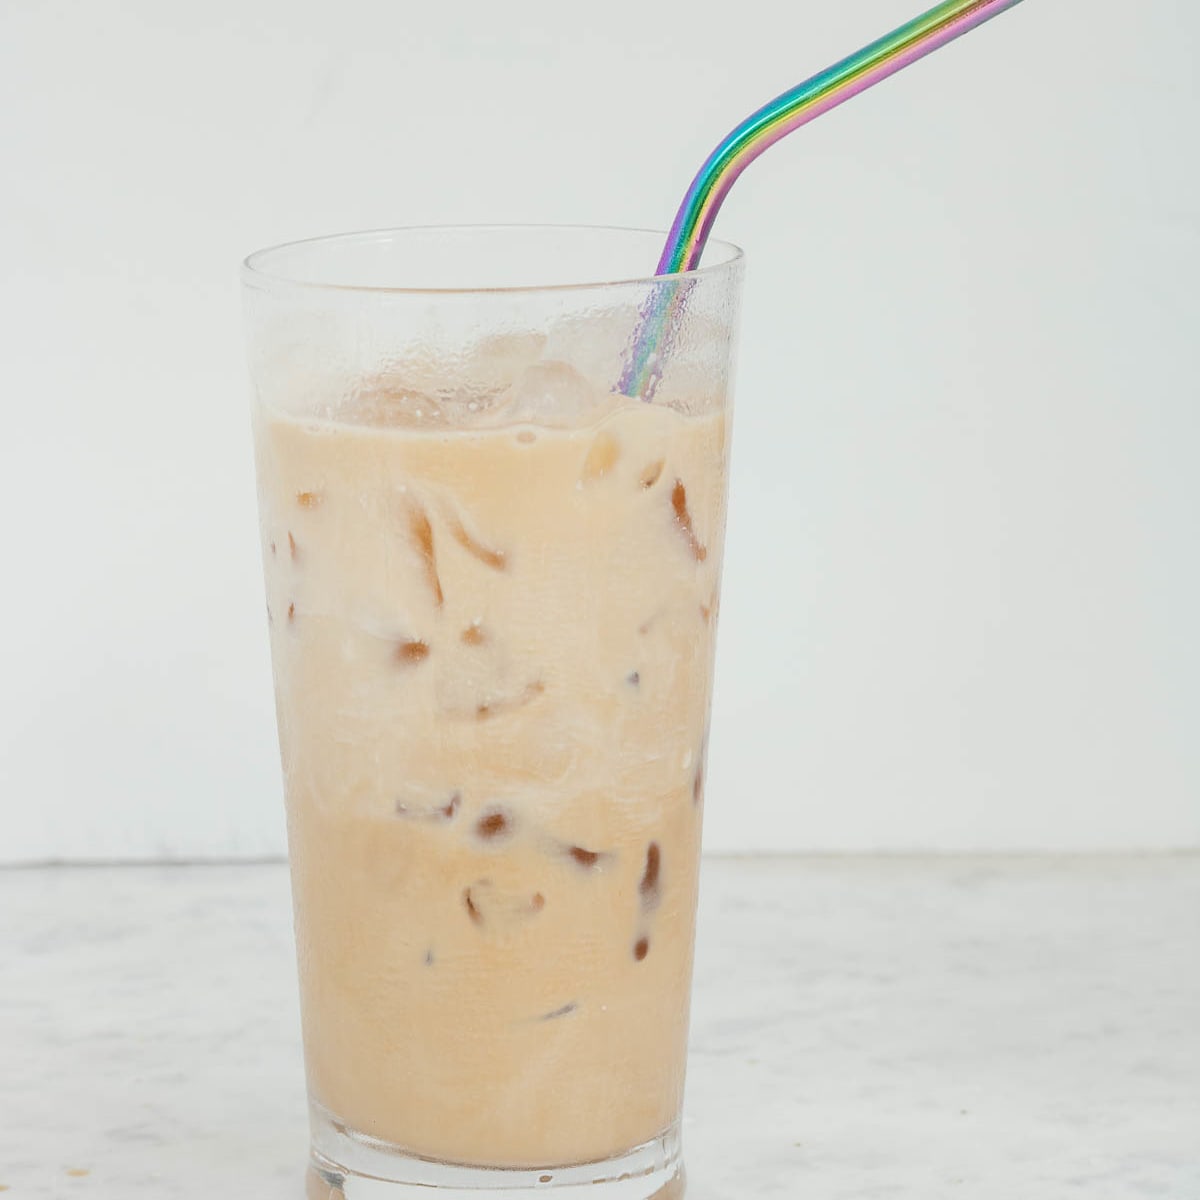 Iced coffee drink on glass jar with featuring coffee, milk, and ice